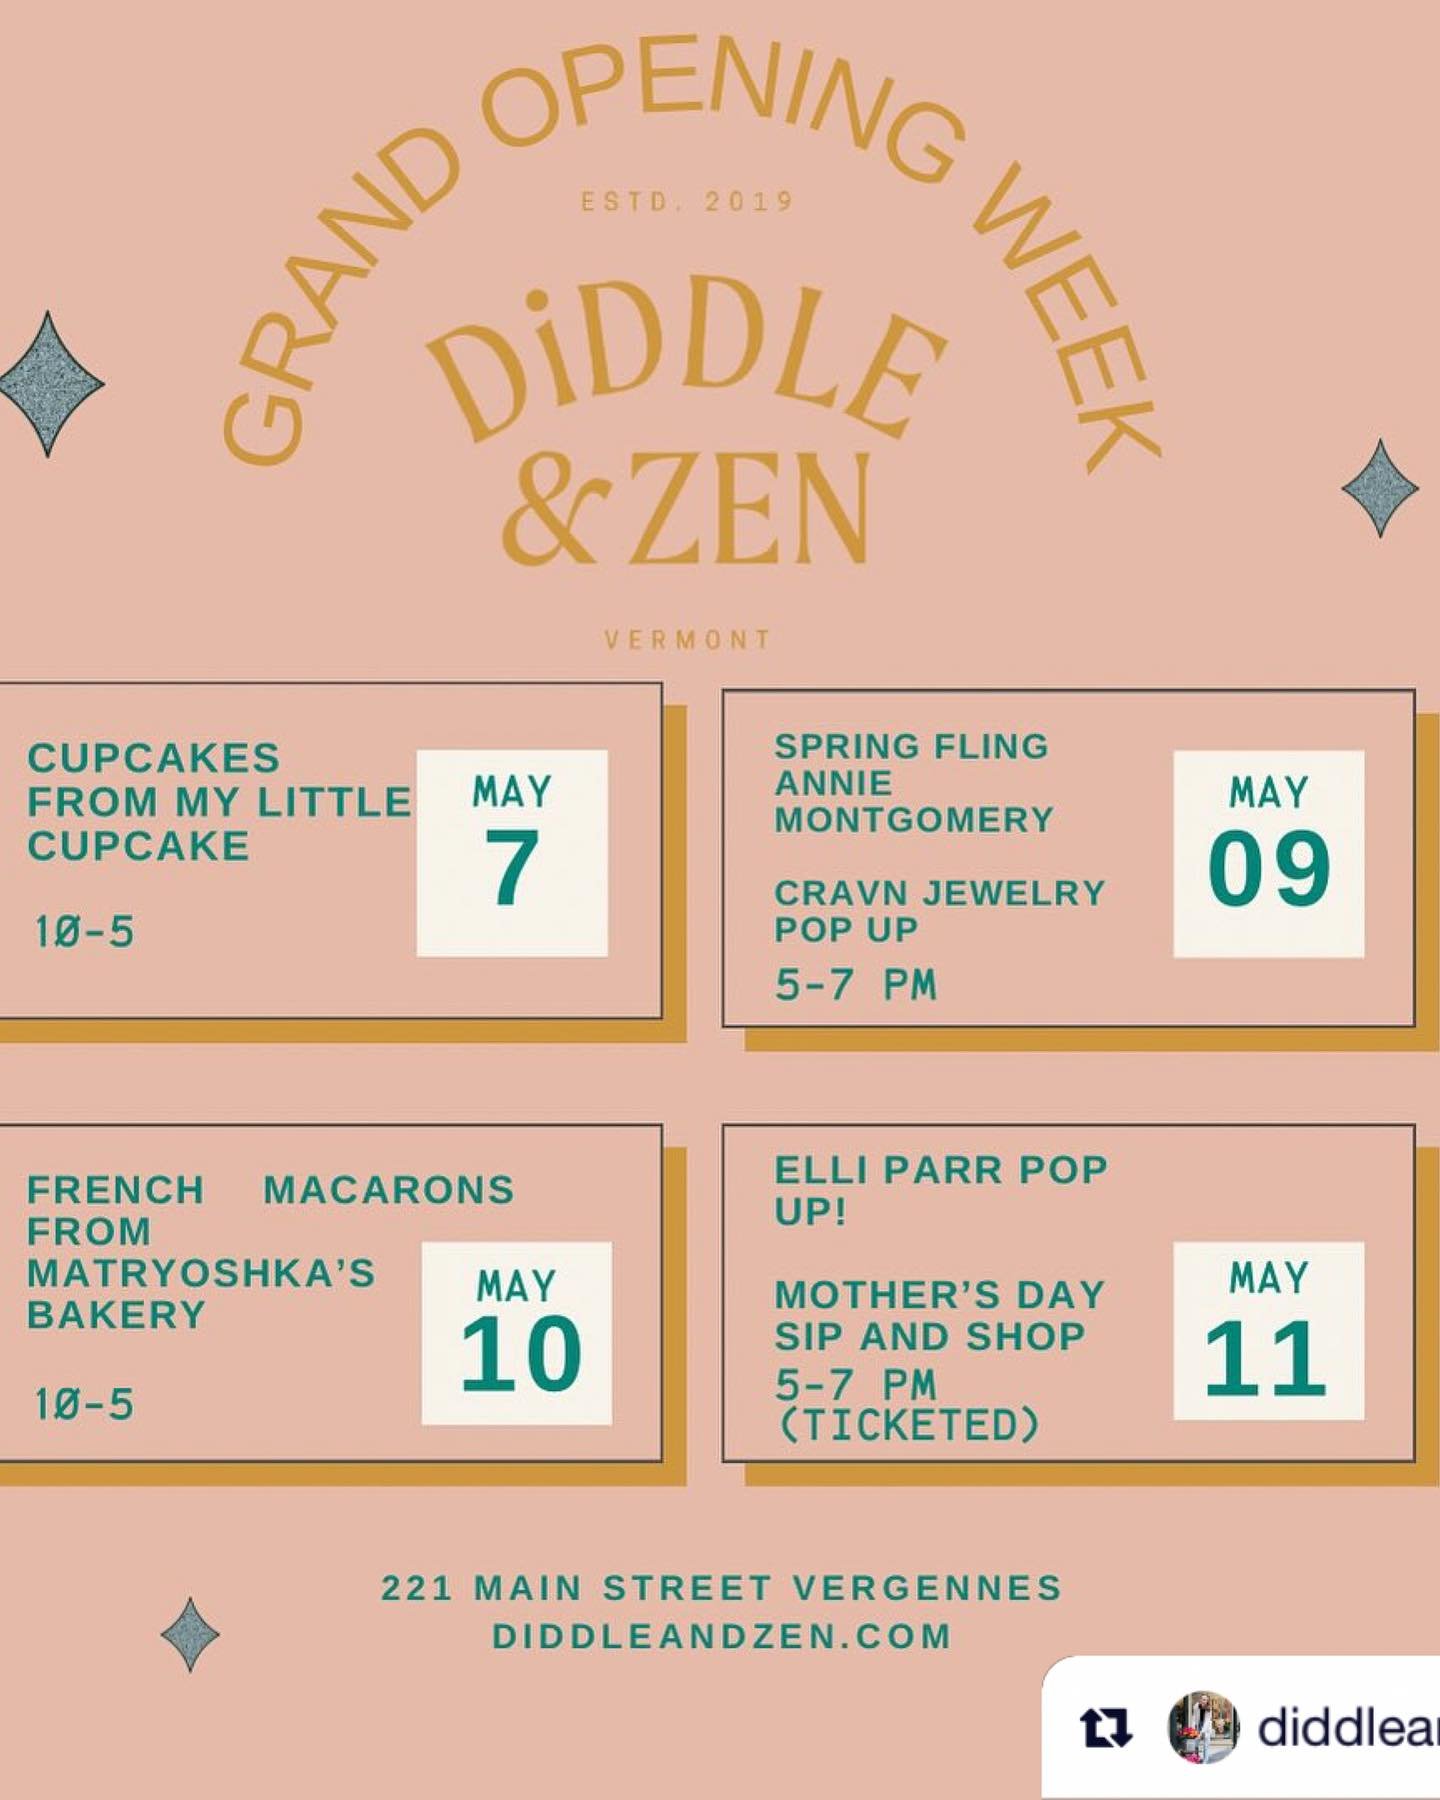 BIG grand opening week for @diddleandzen ~ bonus is their participation at Spring Fling this Thursday evening ~ downtown shops open till 8pm! Shop - sip - dine - win! ❤️